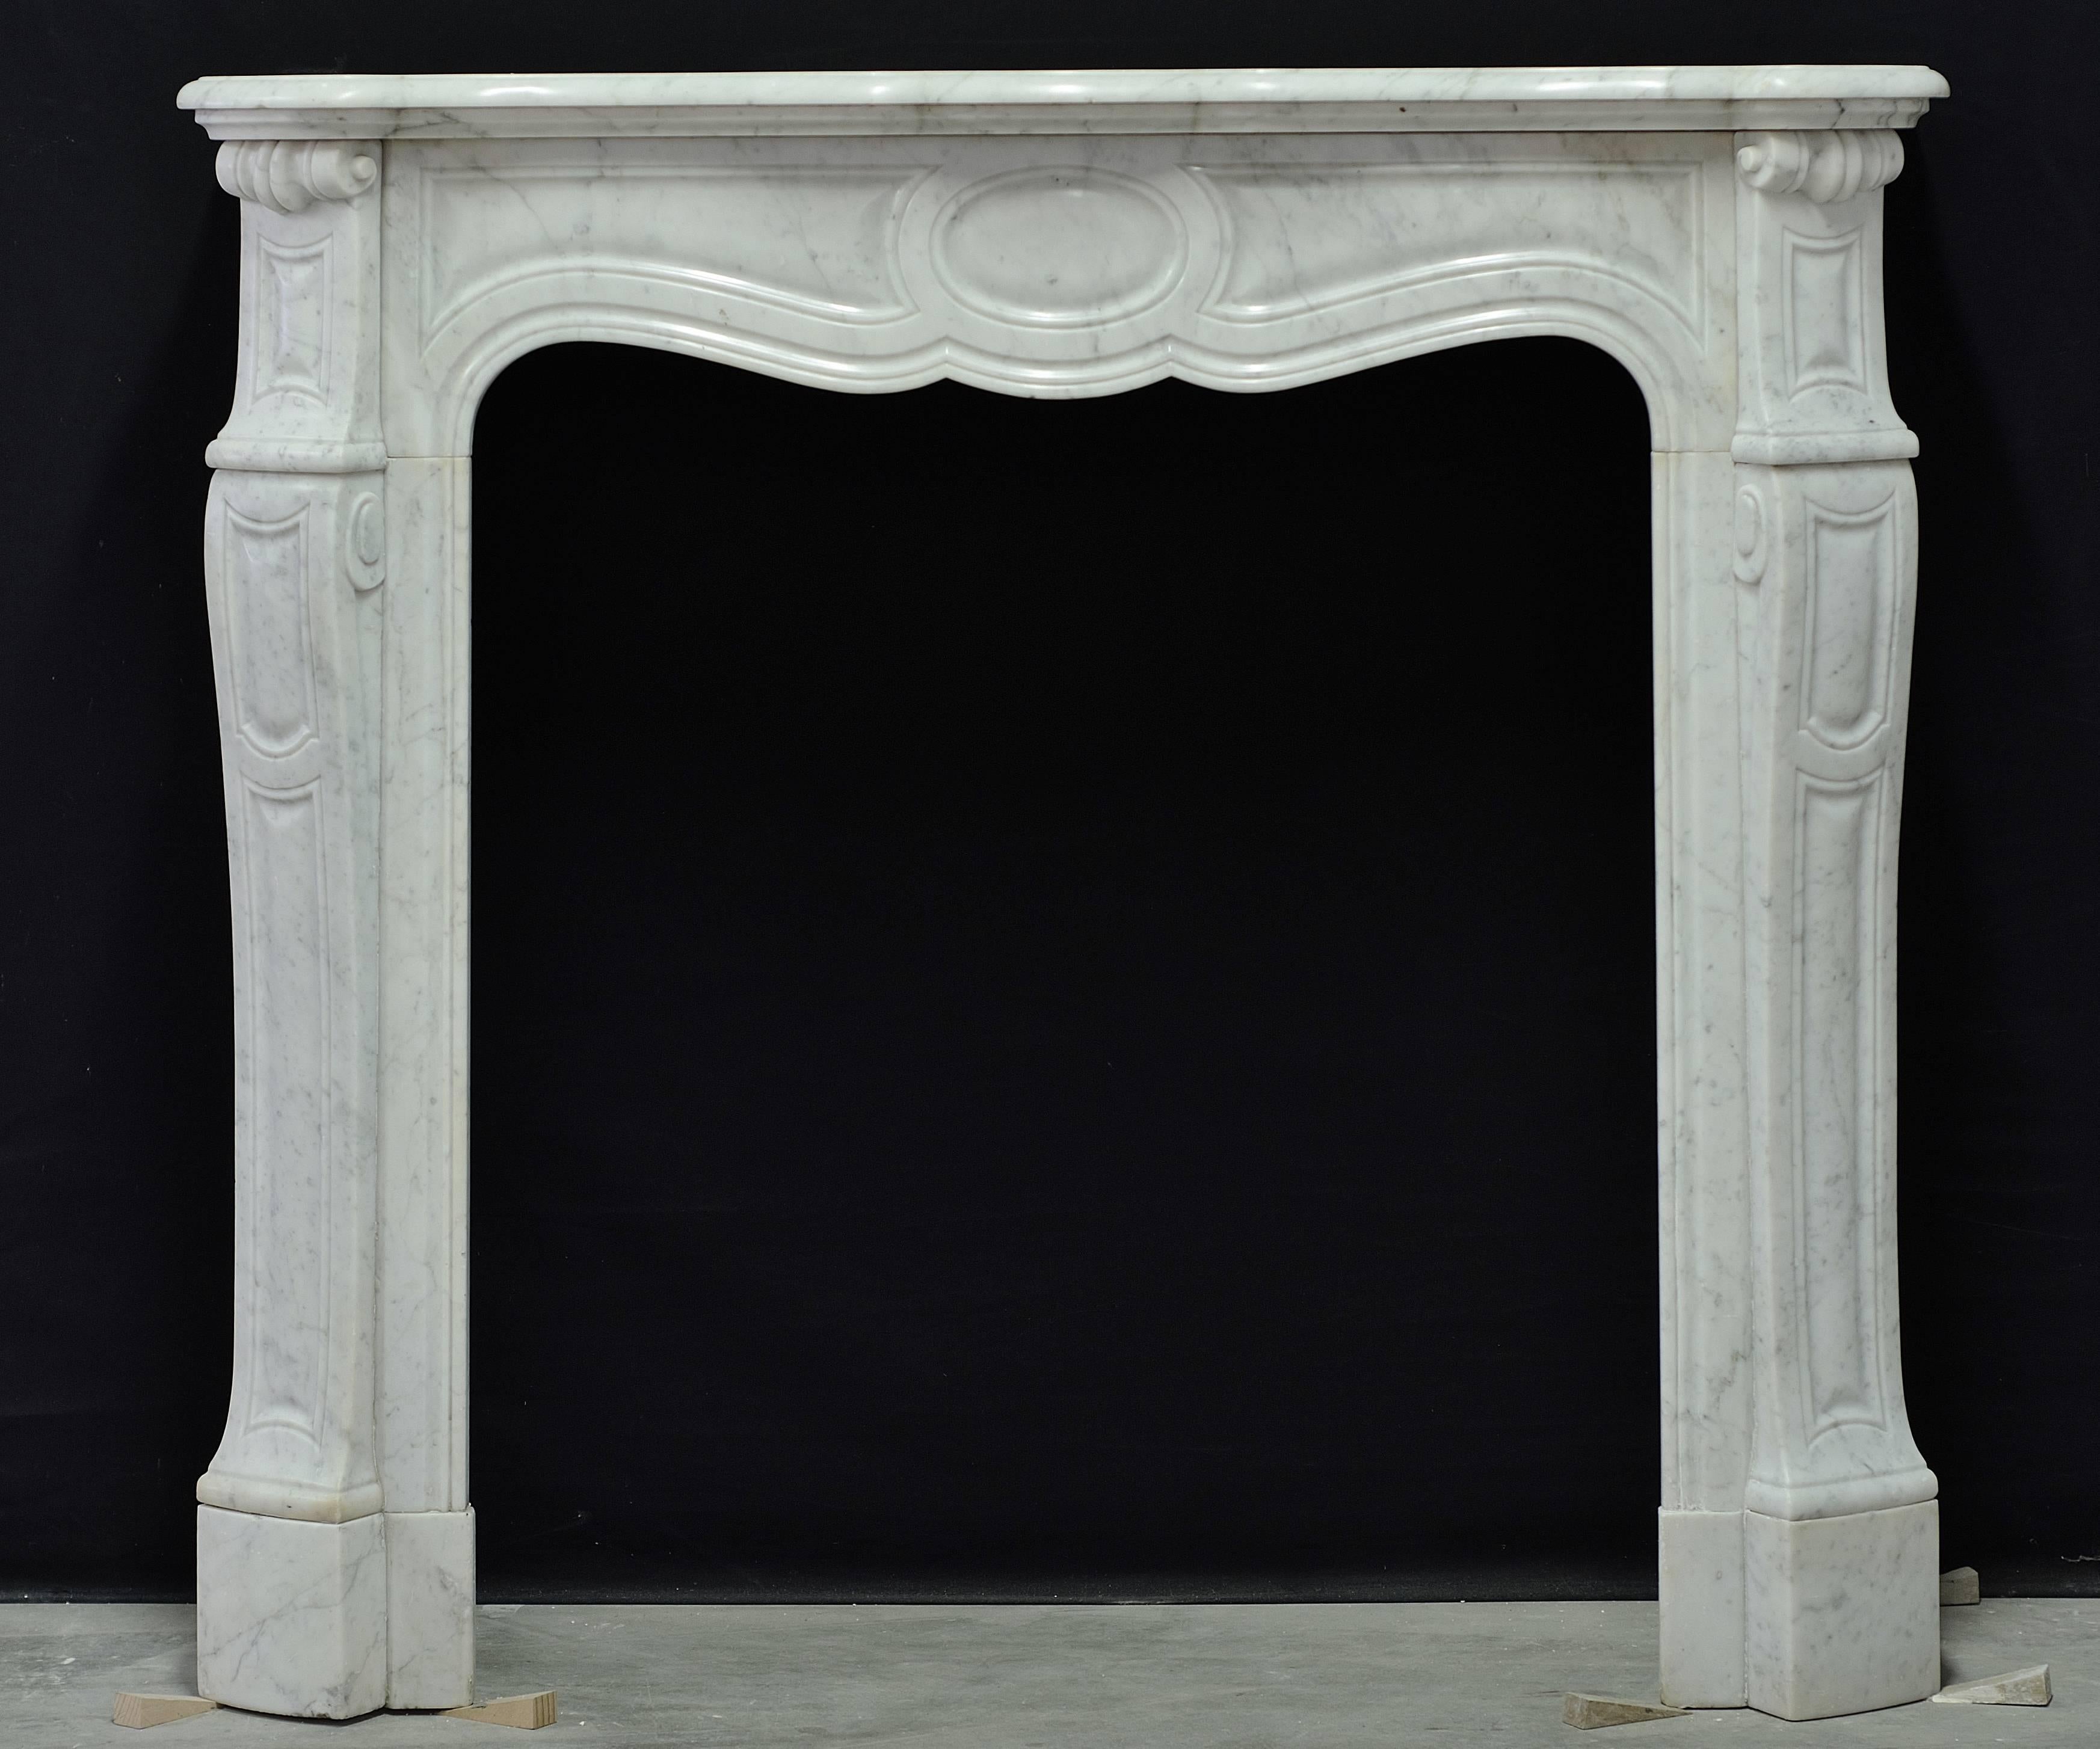 Very nice and decorative white marble pompadour style fireplace,
19th century, France.

Opening measurements:
Height: 33.66 inch. or 85.5 cm. 
Width: 29.5 inch. or 75 cm.
